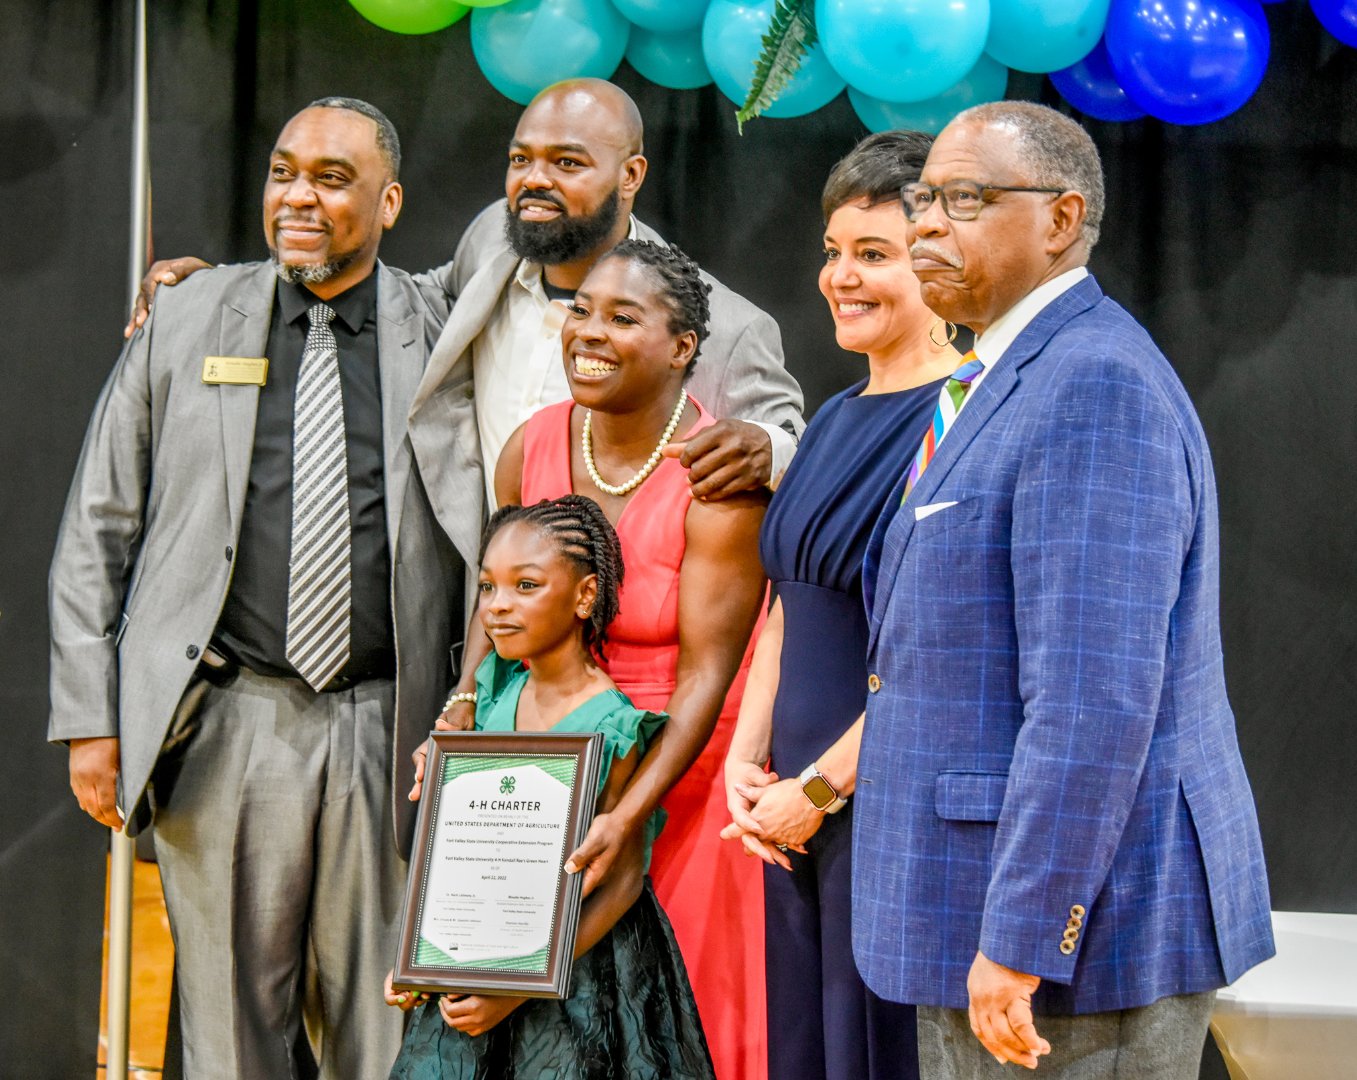 Kendall receives the 4-H Charter, along with Woodie Hughes Jr., assistant Extension administrator state 4-H program leader; her parents; Dr. Jewel Bronaugh, deputy secretary of agriculture; and Dr. Mark Latimore Jr., Extension administrator.